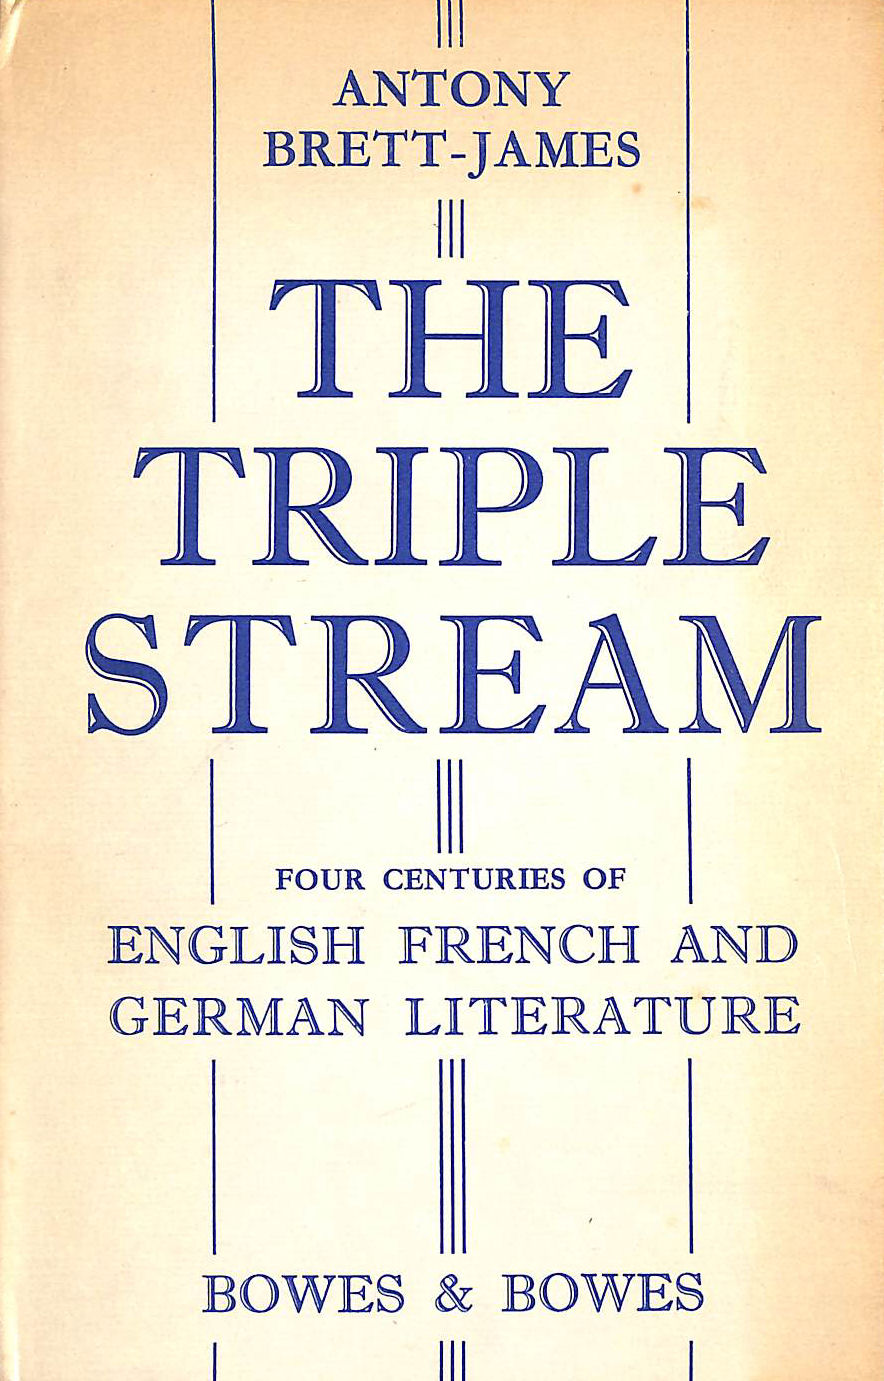 BRETT-JAMES, ANTONY - The Triple Stream: Four Centuries Of English, French And German Literature,1531-1930